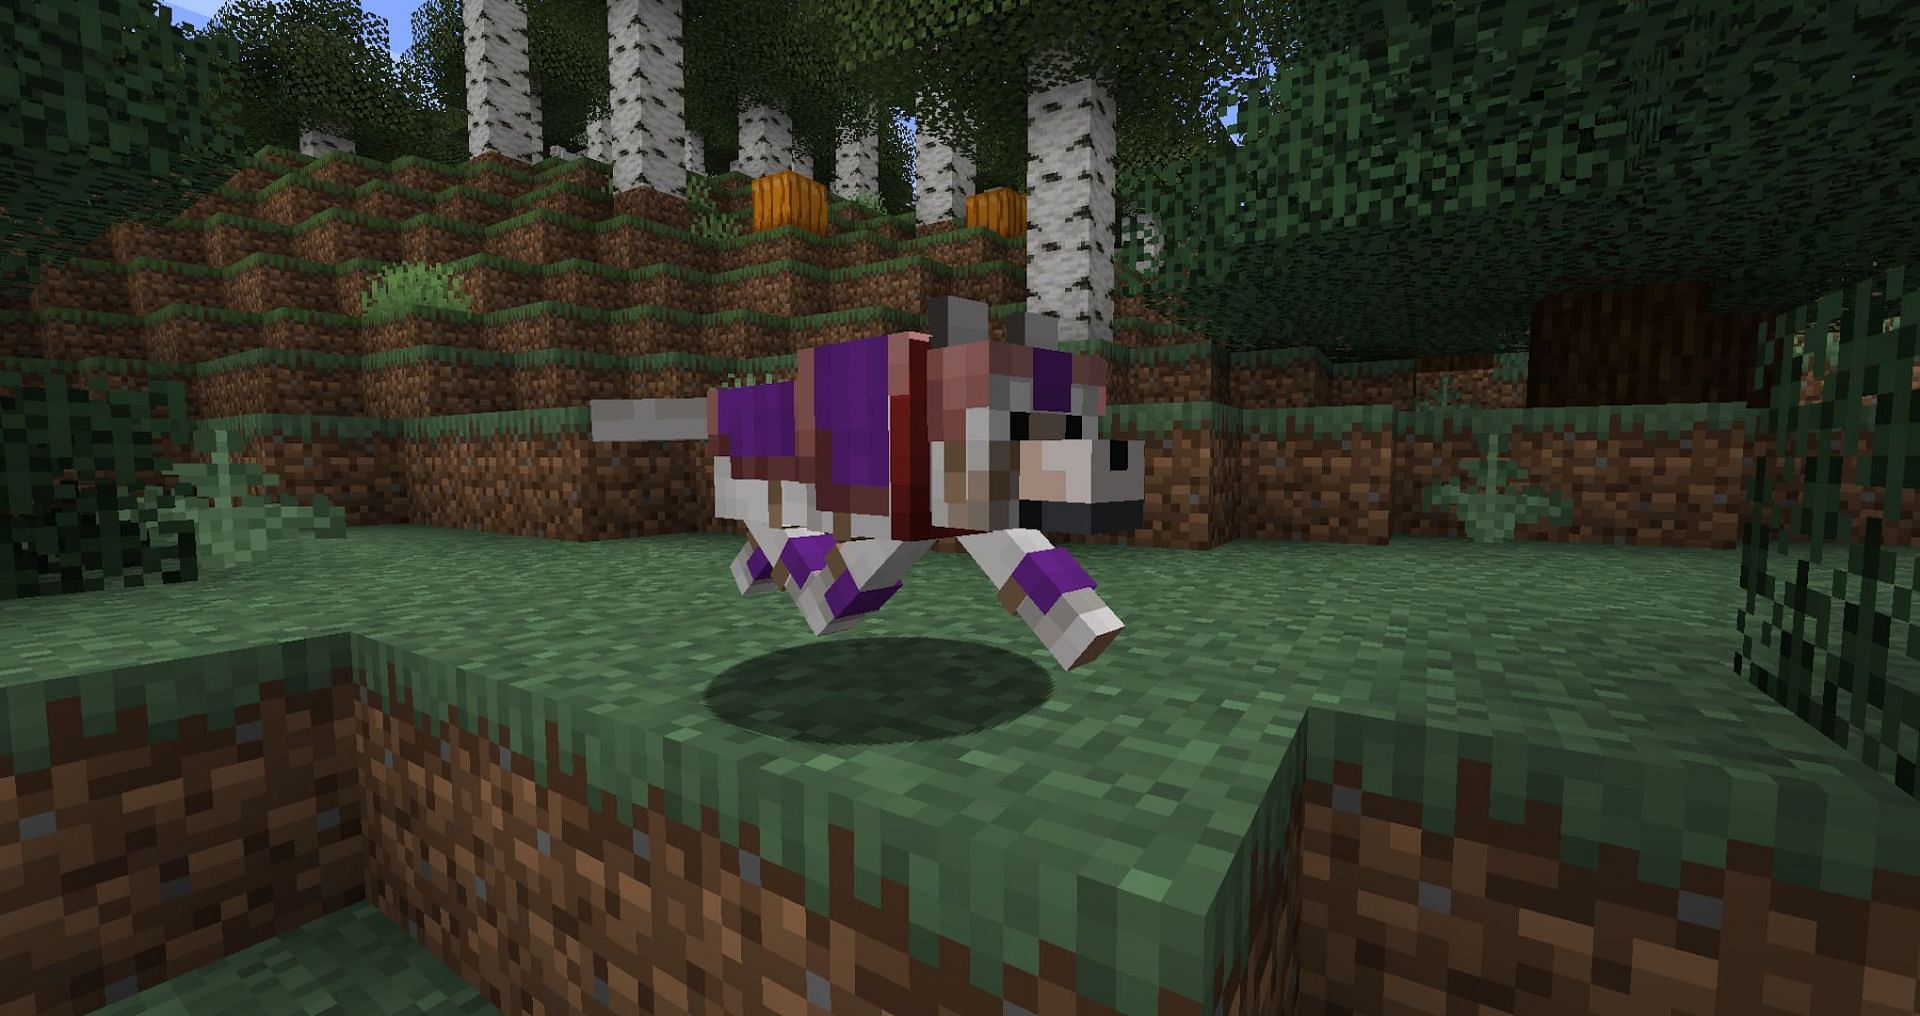 Wolf armor being dyable adds so much flair to it (Image via Mojang)